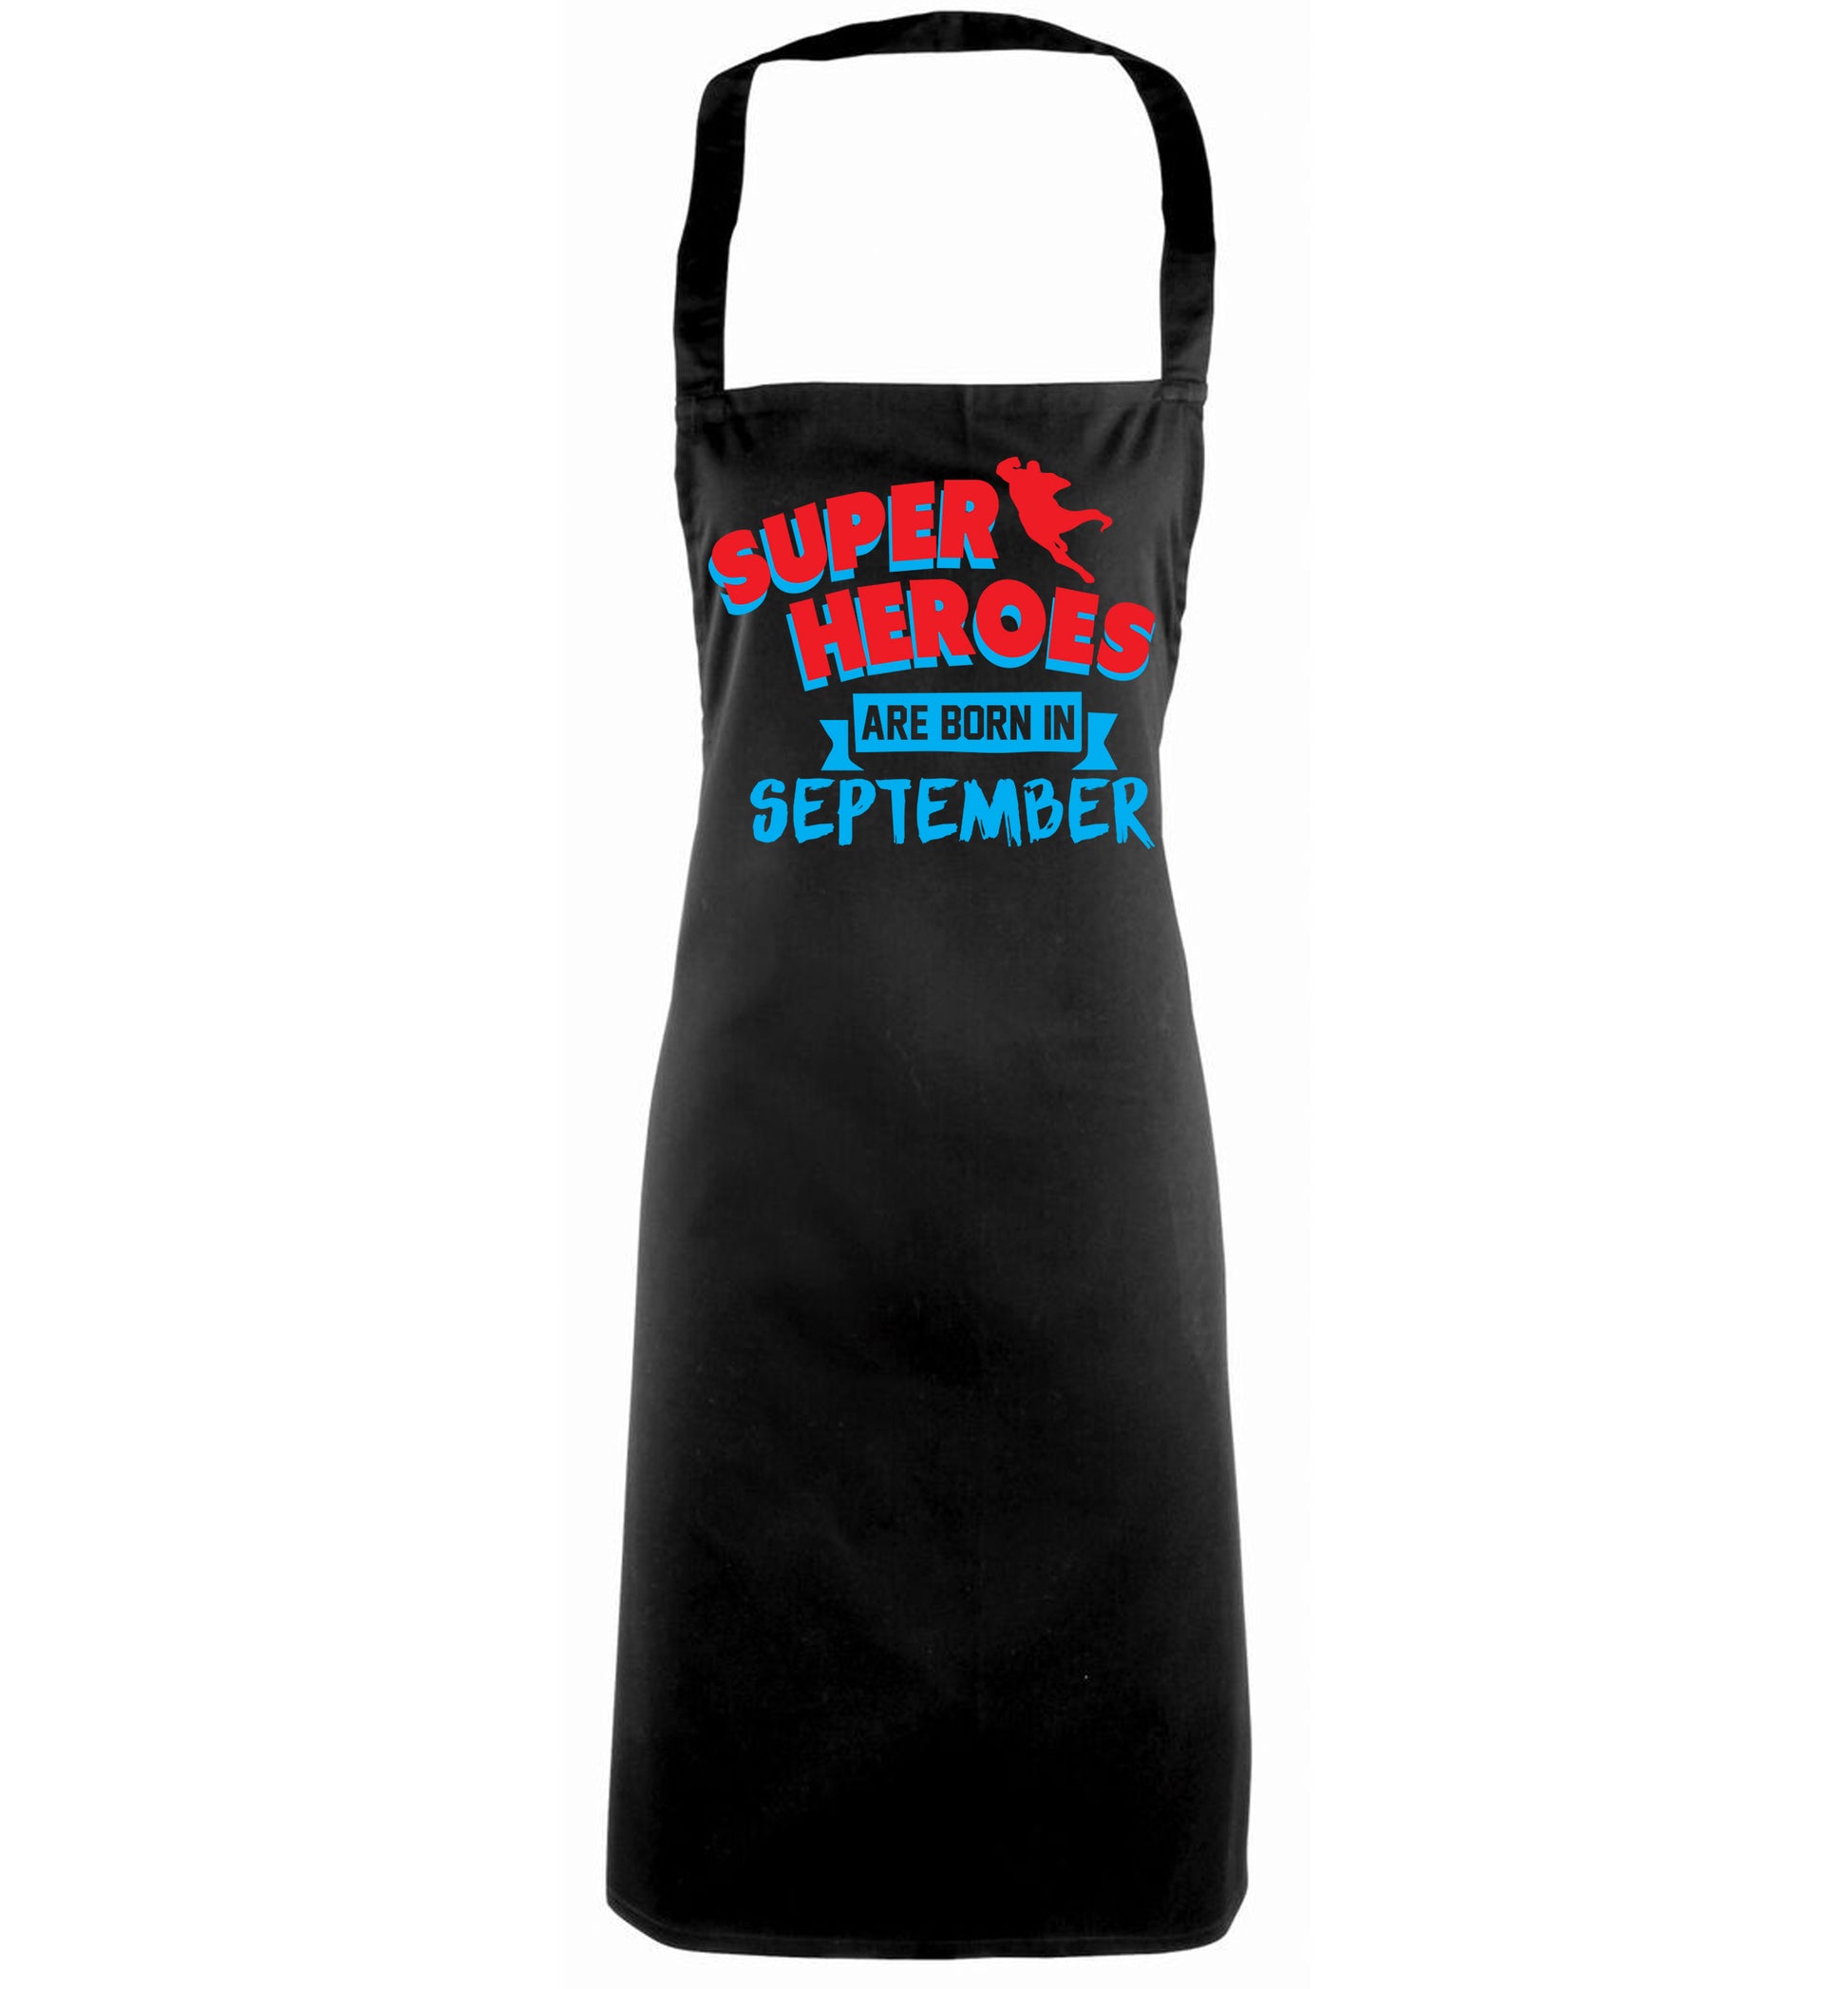 Superheroes are born in September black apron